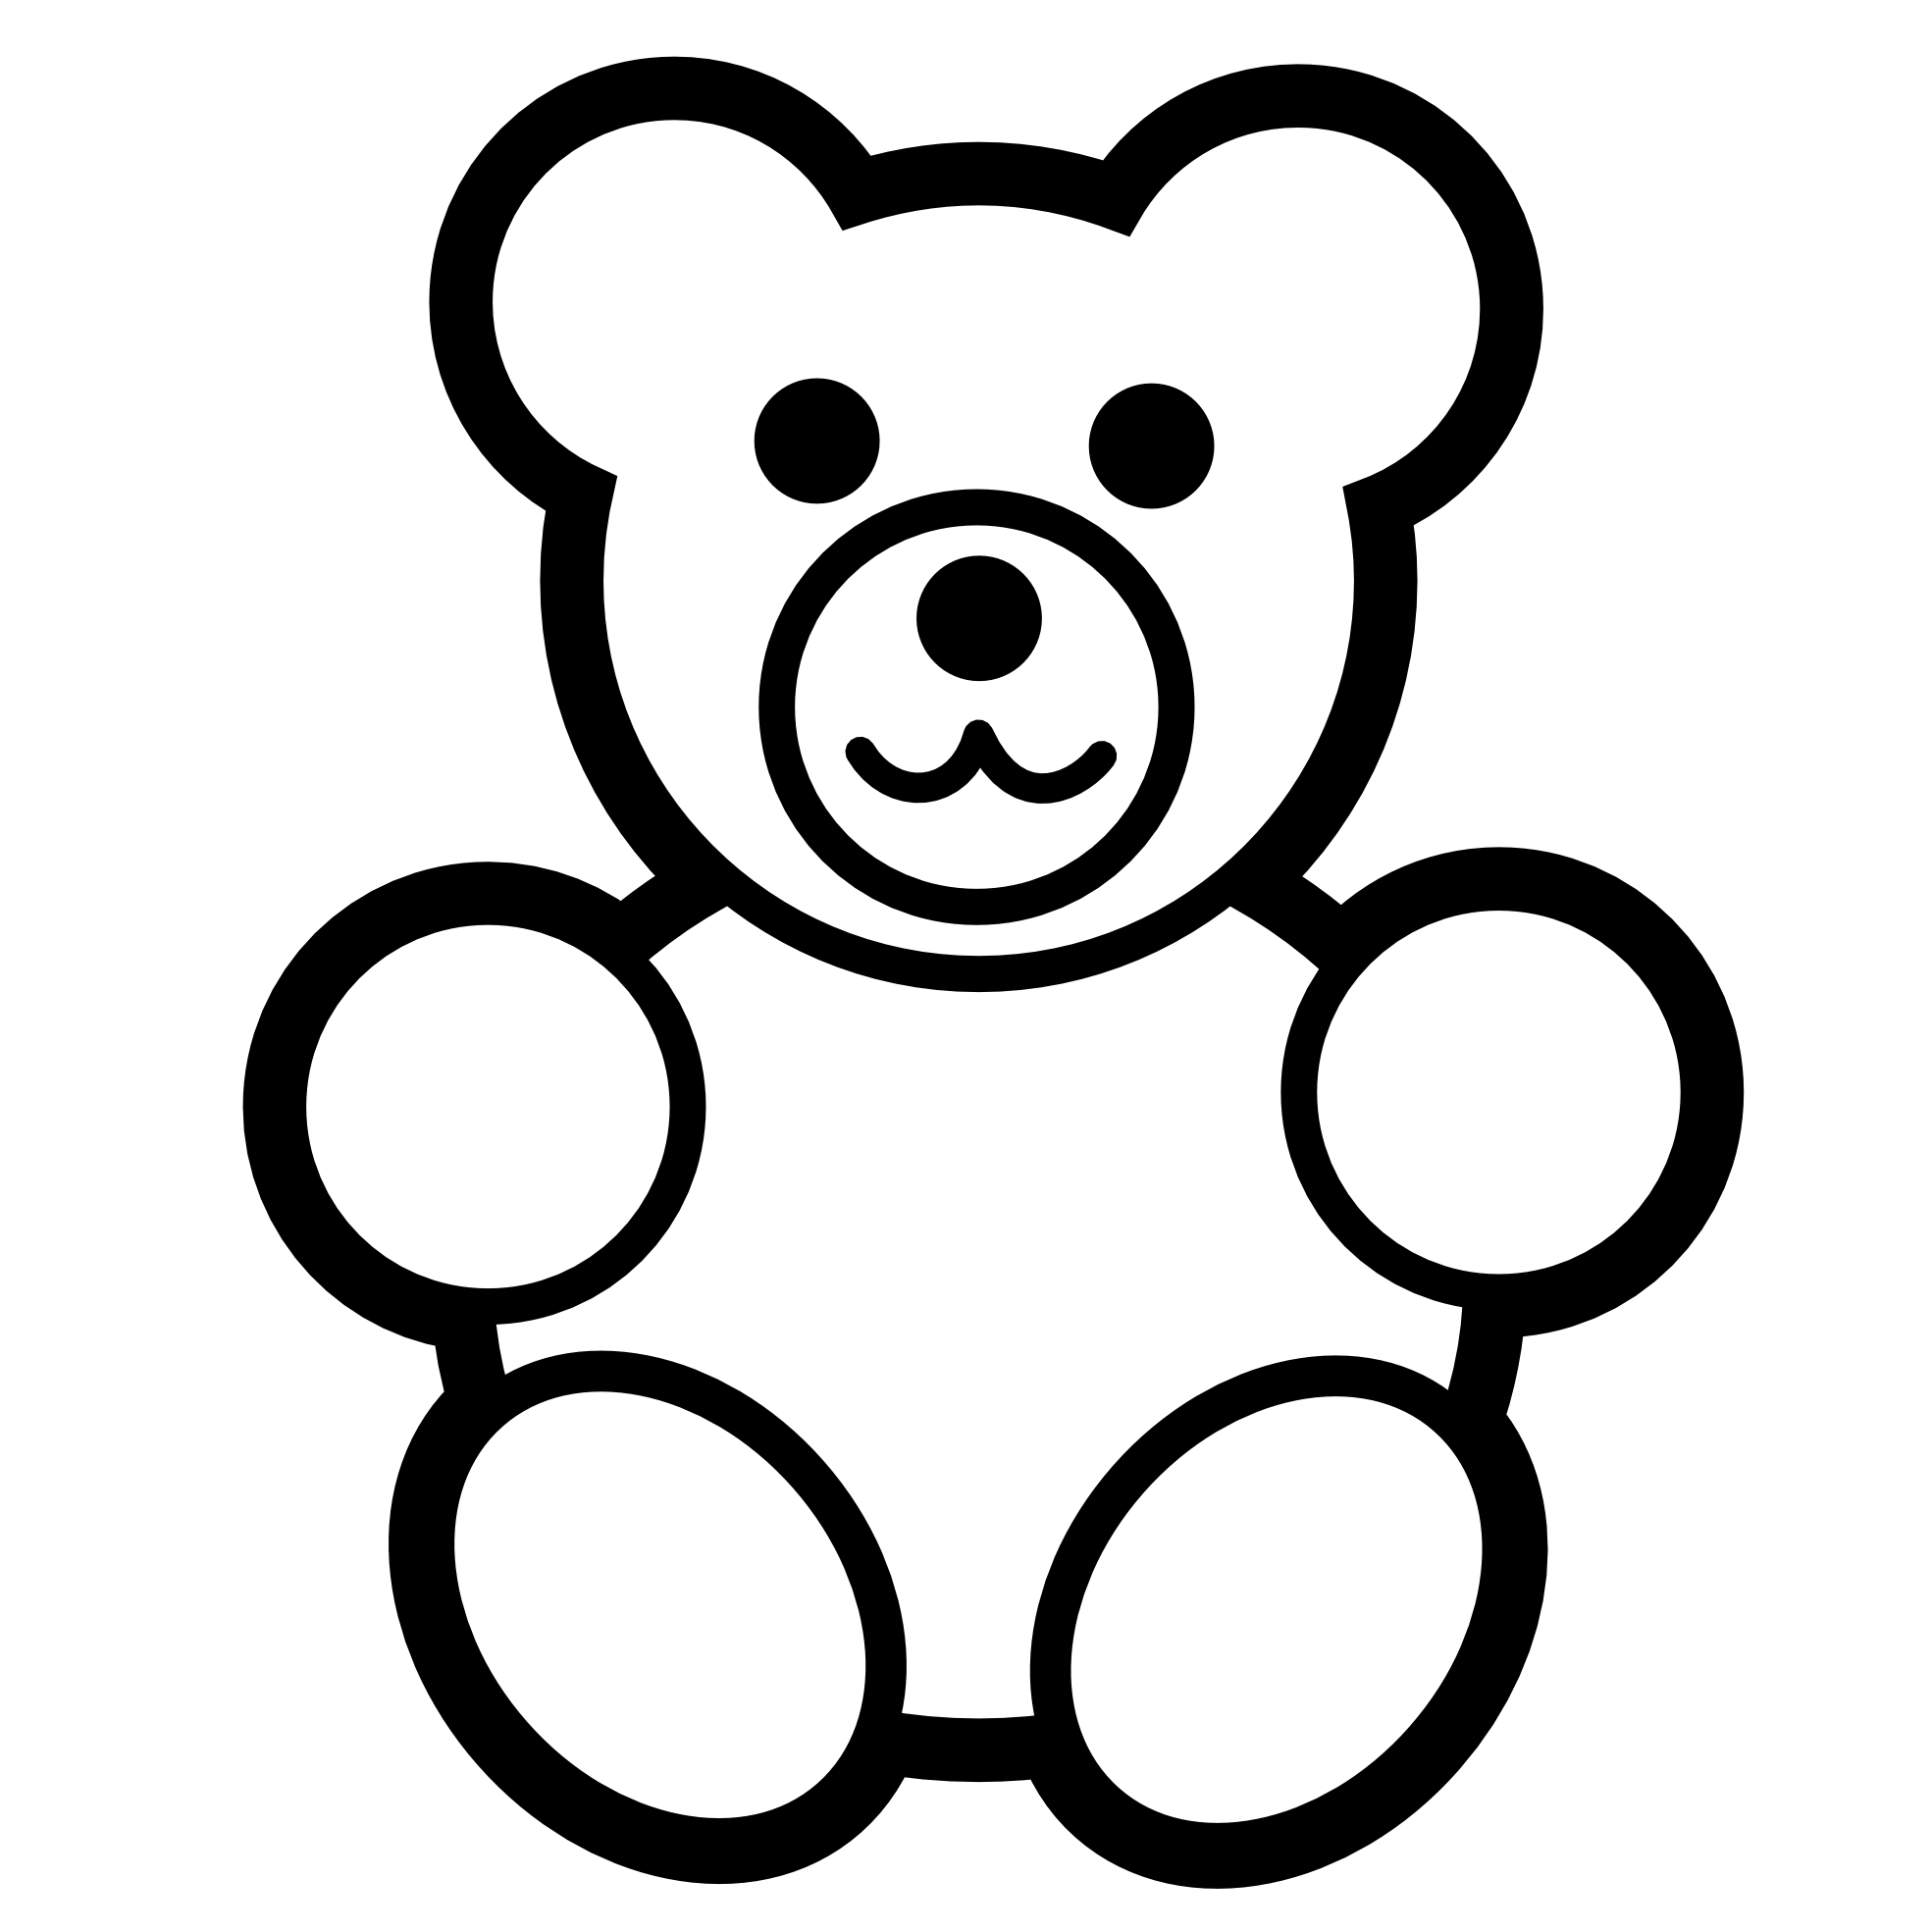 Pix For > Cute Teddy Bear Clipart Black And White